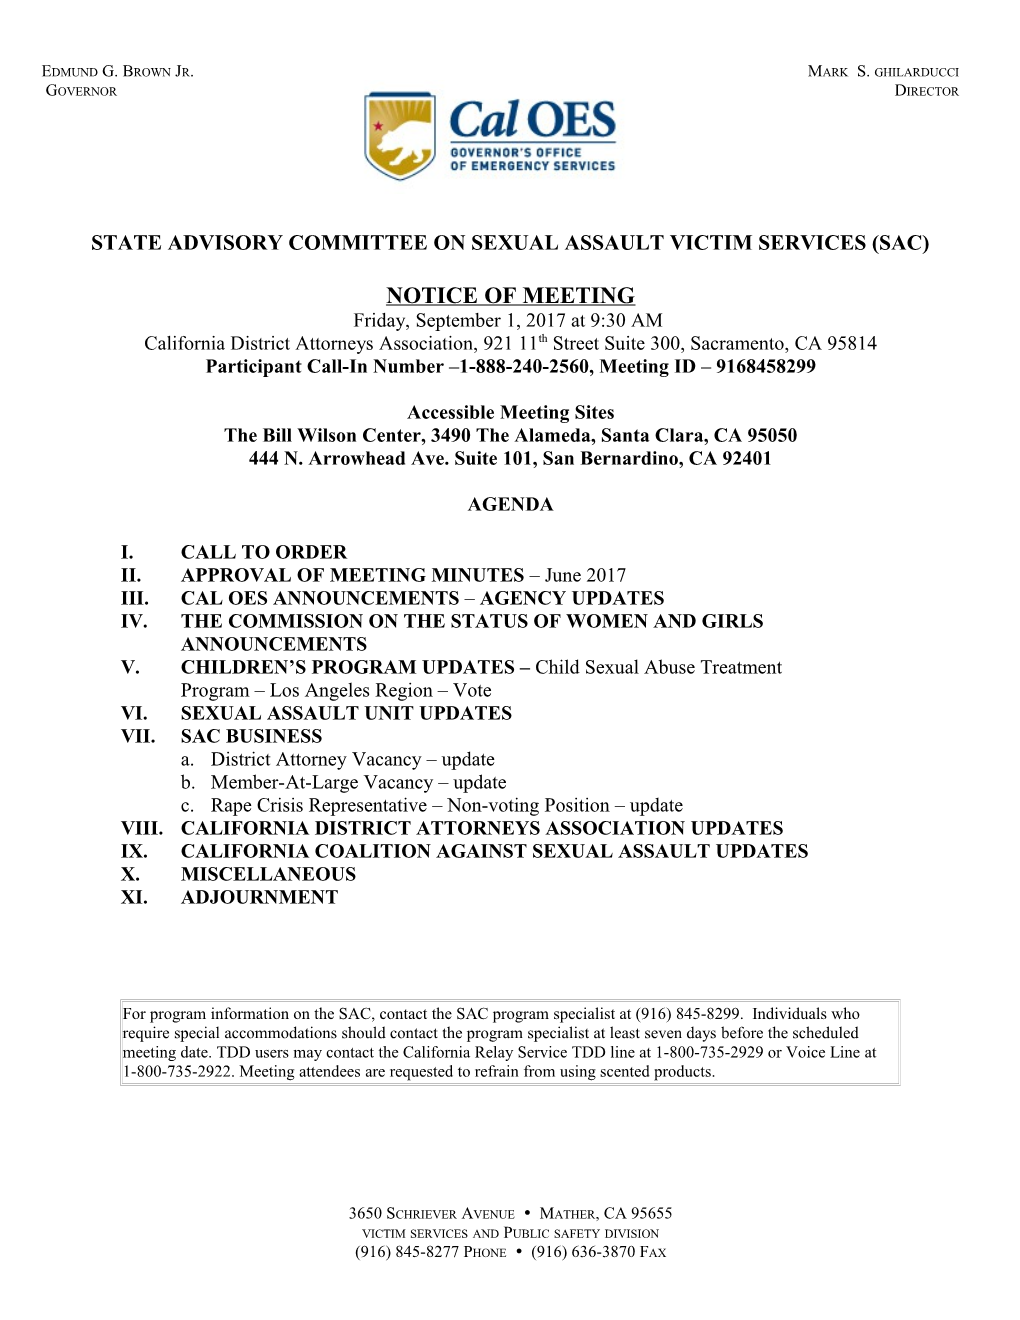 State Advisory Committee on Sexual Assault Victim Services (SAC) Notice of Meeting - September